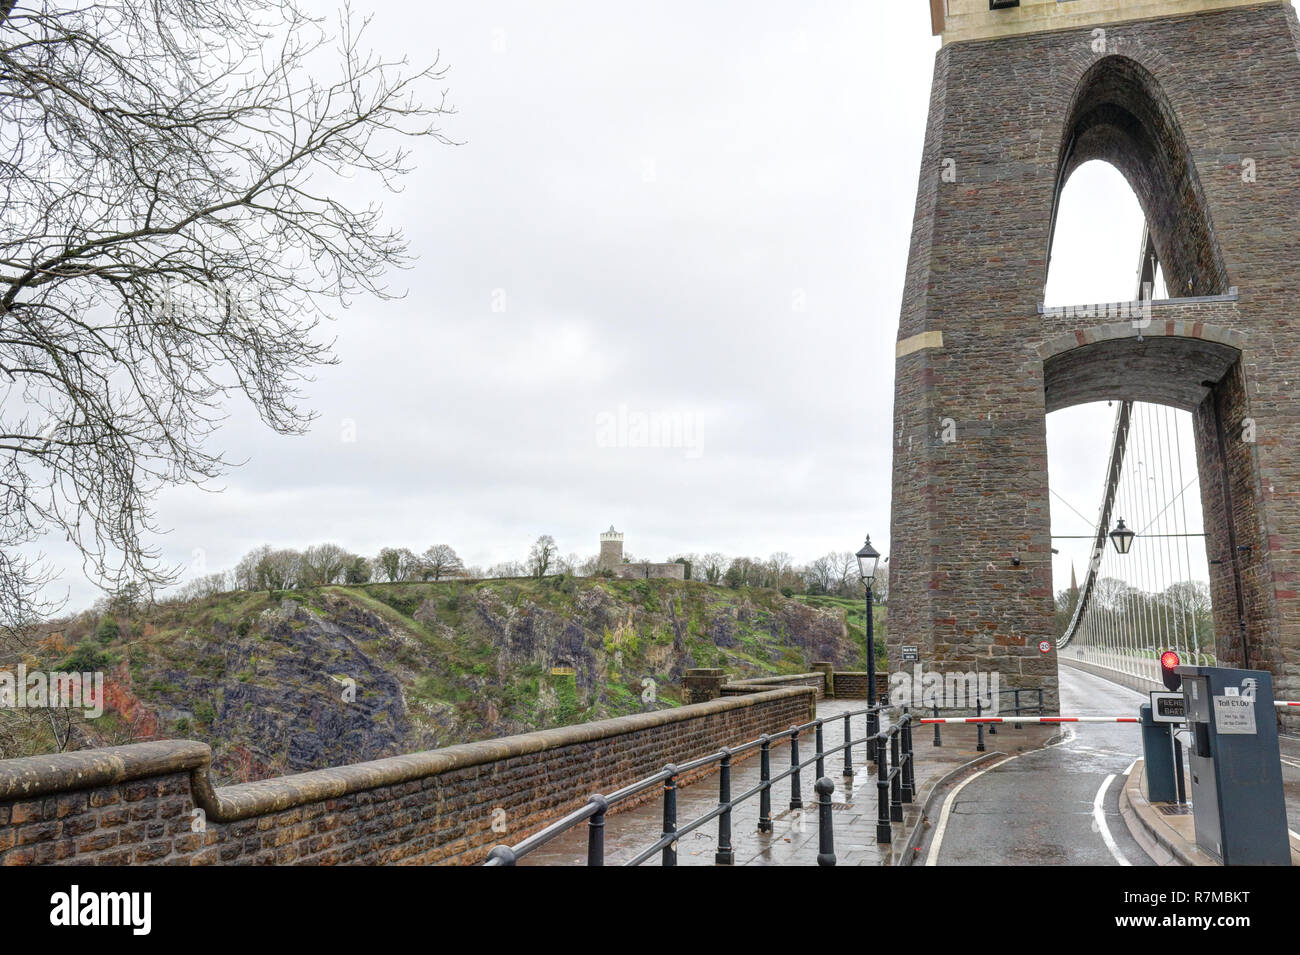 A detail of the tower at the entrance of the Clifton suspension bridge in a cloudy winter day in Bristol, United Kingdom Stock Photo